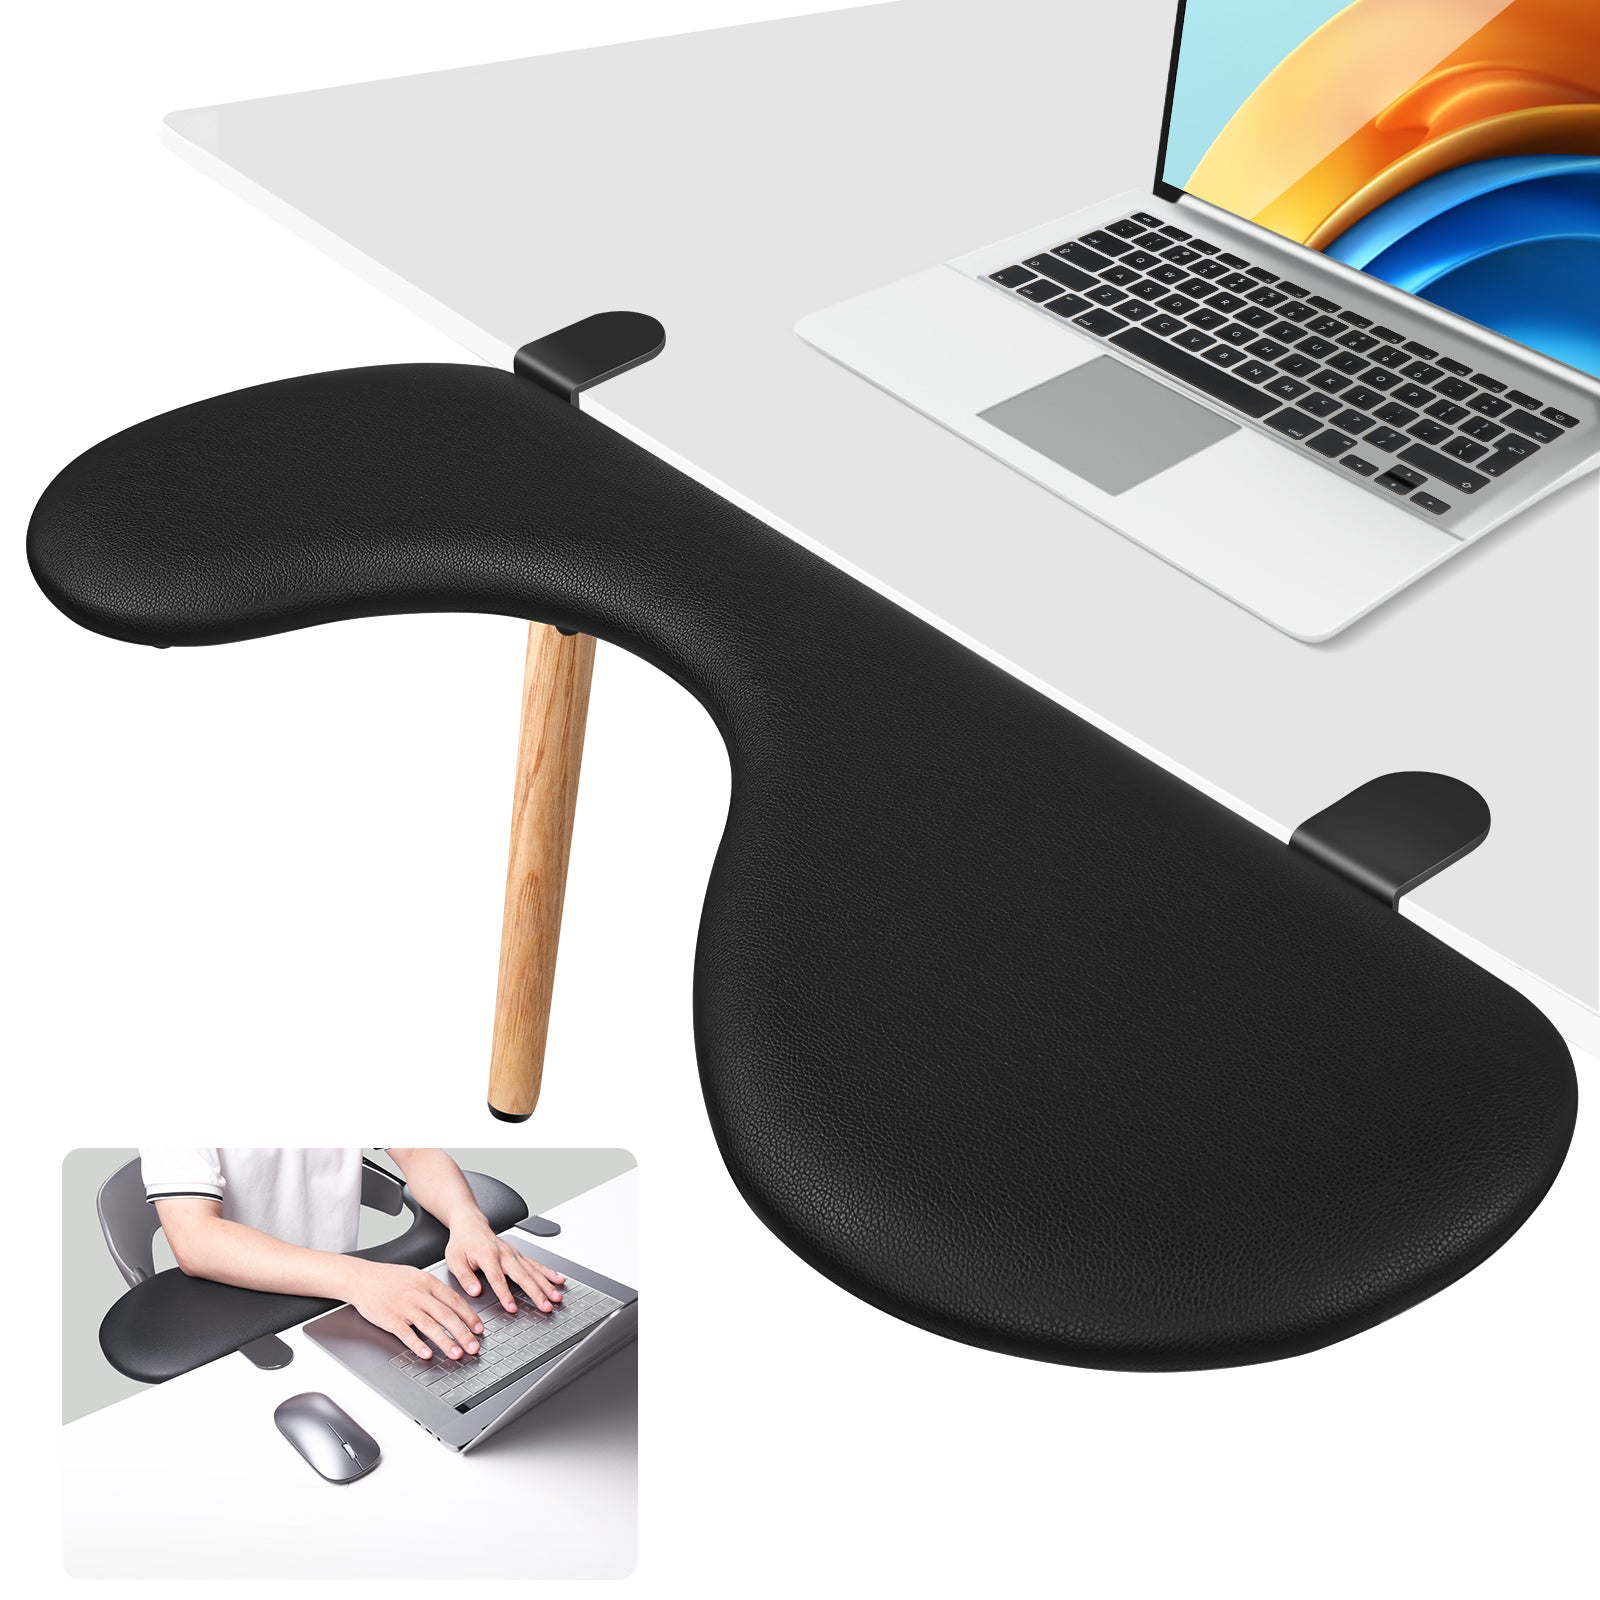 Desk Forearm Support for Production, Office, Factory